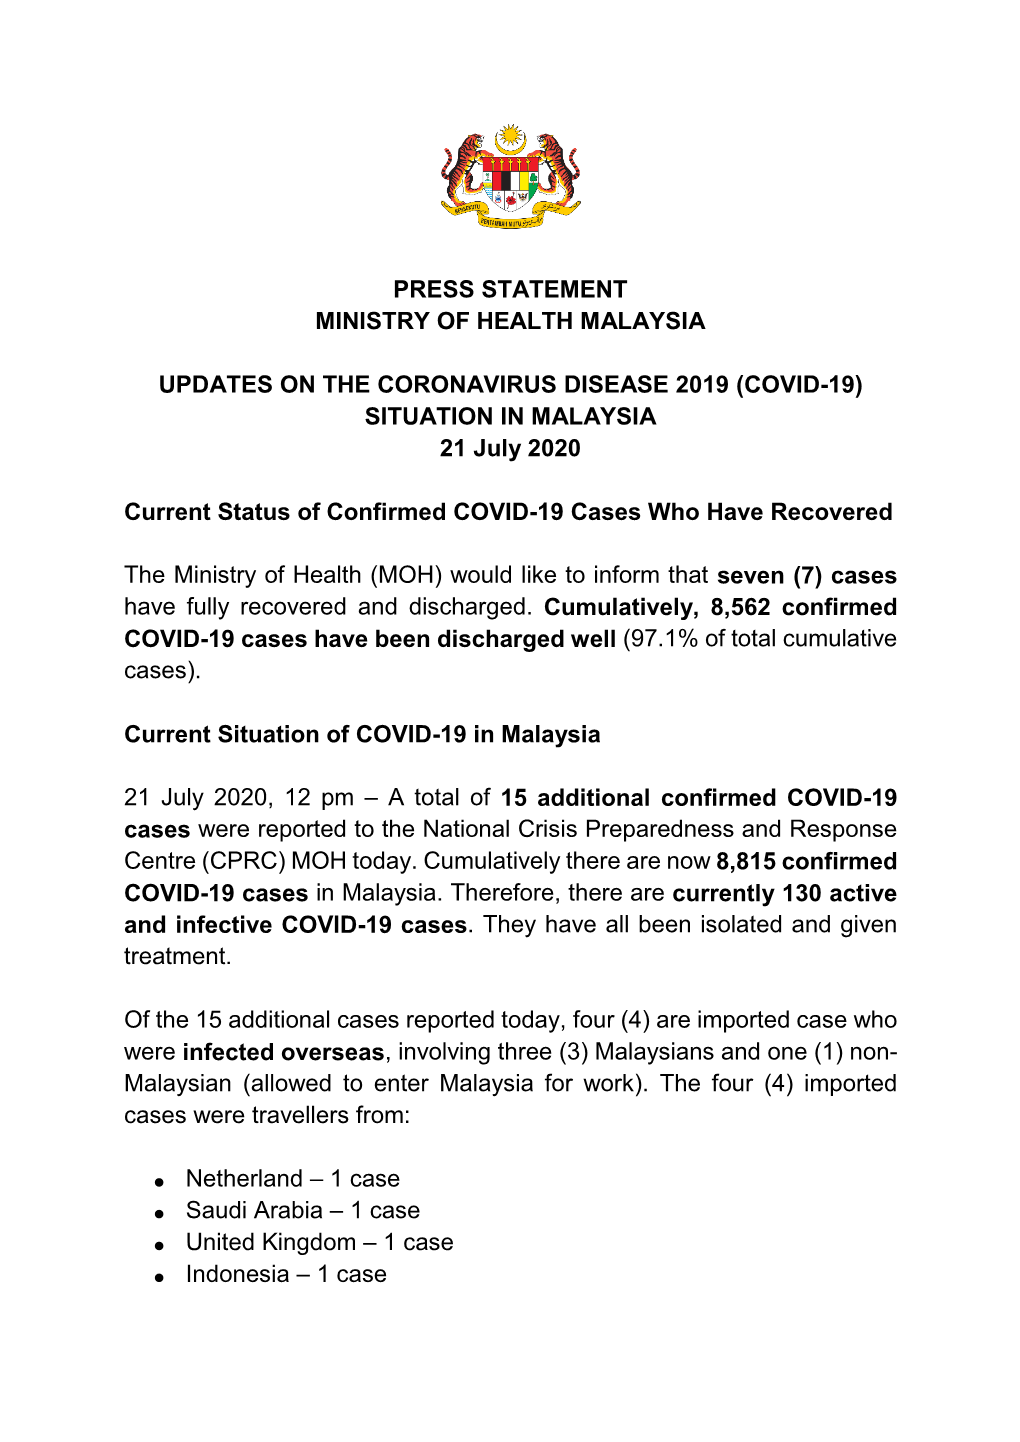 PRESS STATEMENT MINISTRY of HEALTH MALAYSIA UPDATES on the CORONAVIRUS DISEASE 2019 (COVID-19) SITUATION in MALAYSIA 21 July 20